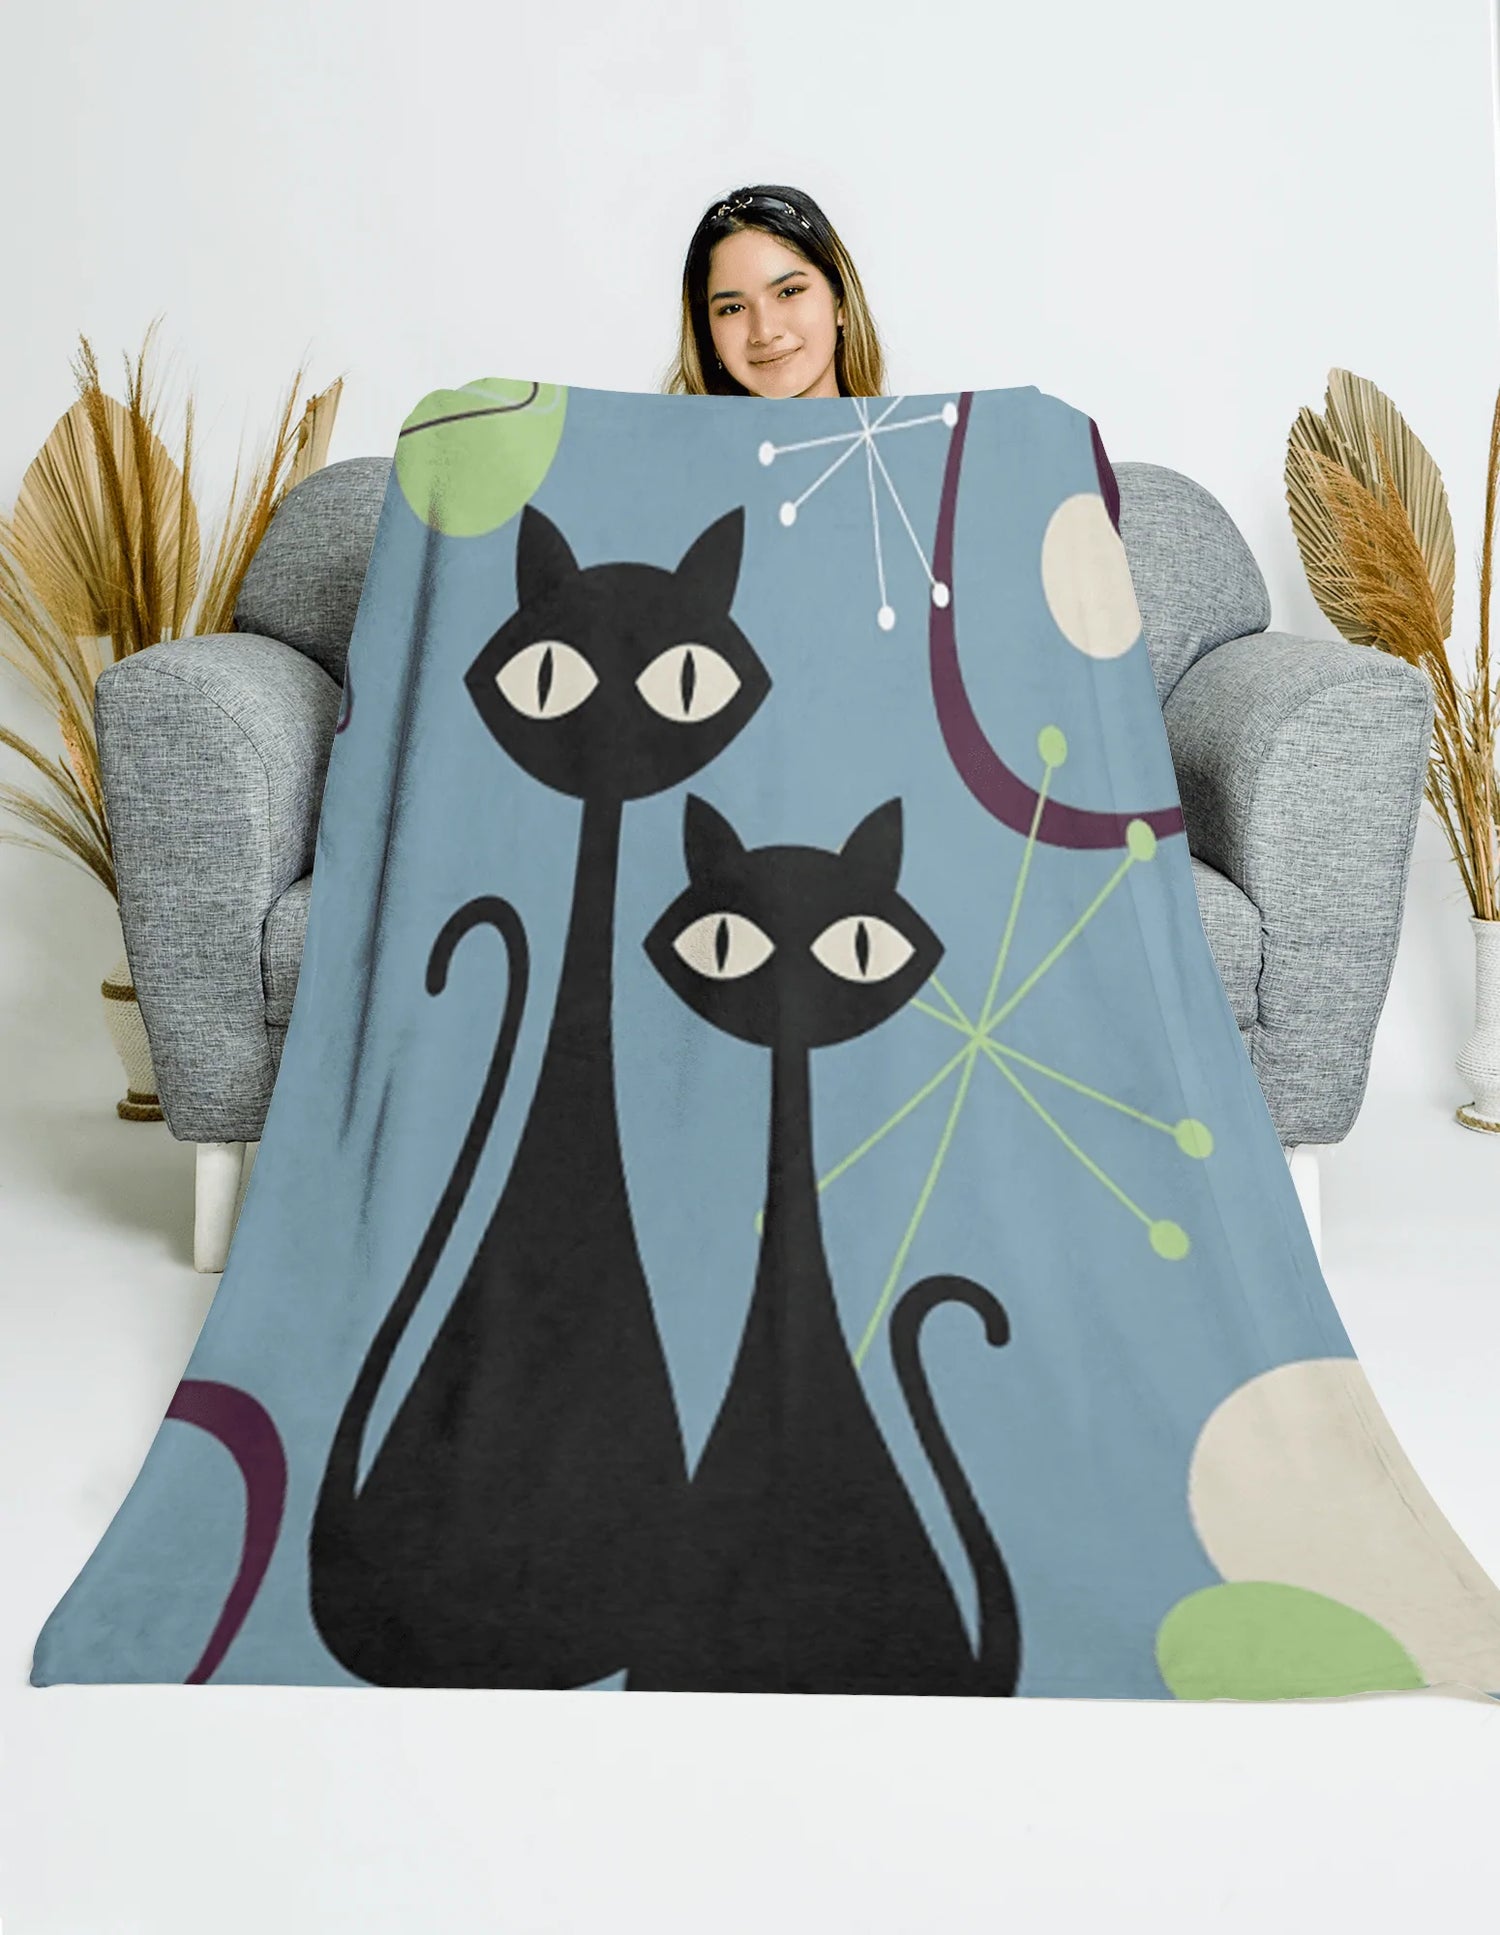 Atomic Cat, Atomic Boomerang, Him and Her Mid Century Modern THIN Velveteen Cozy Warm Blanket Gift All Over Prints